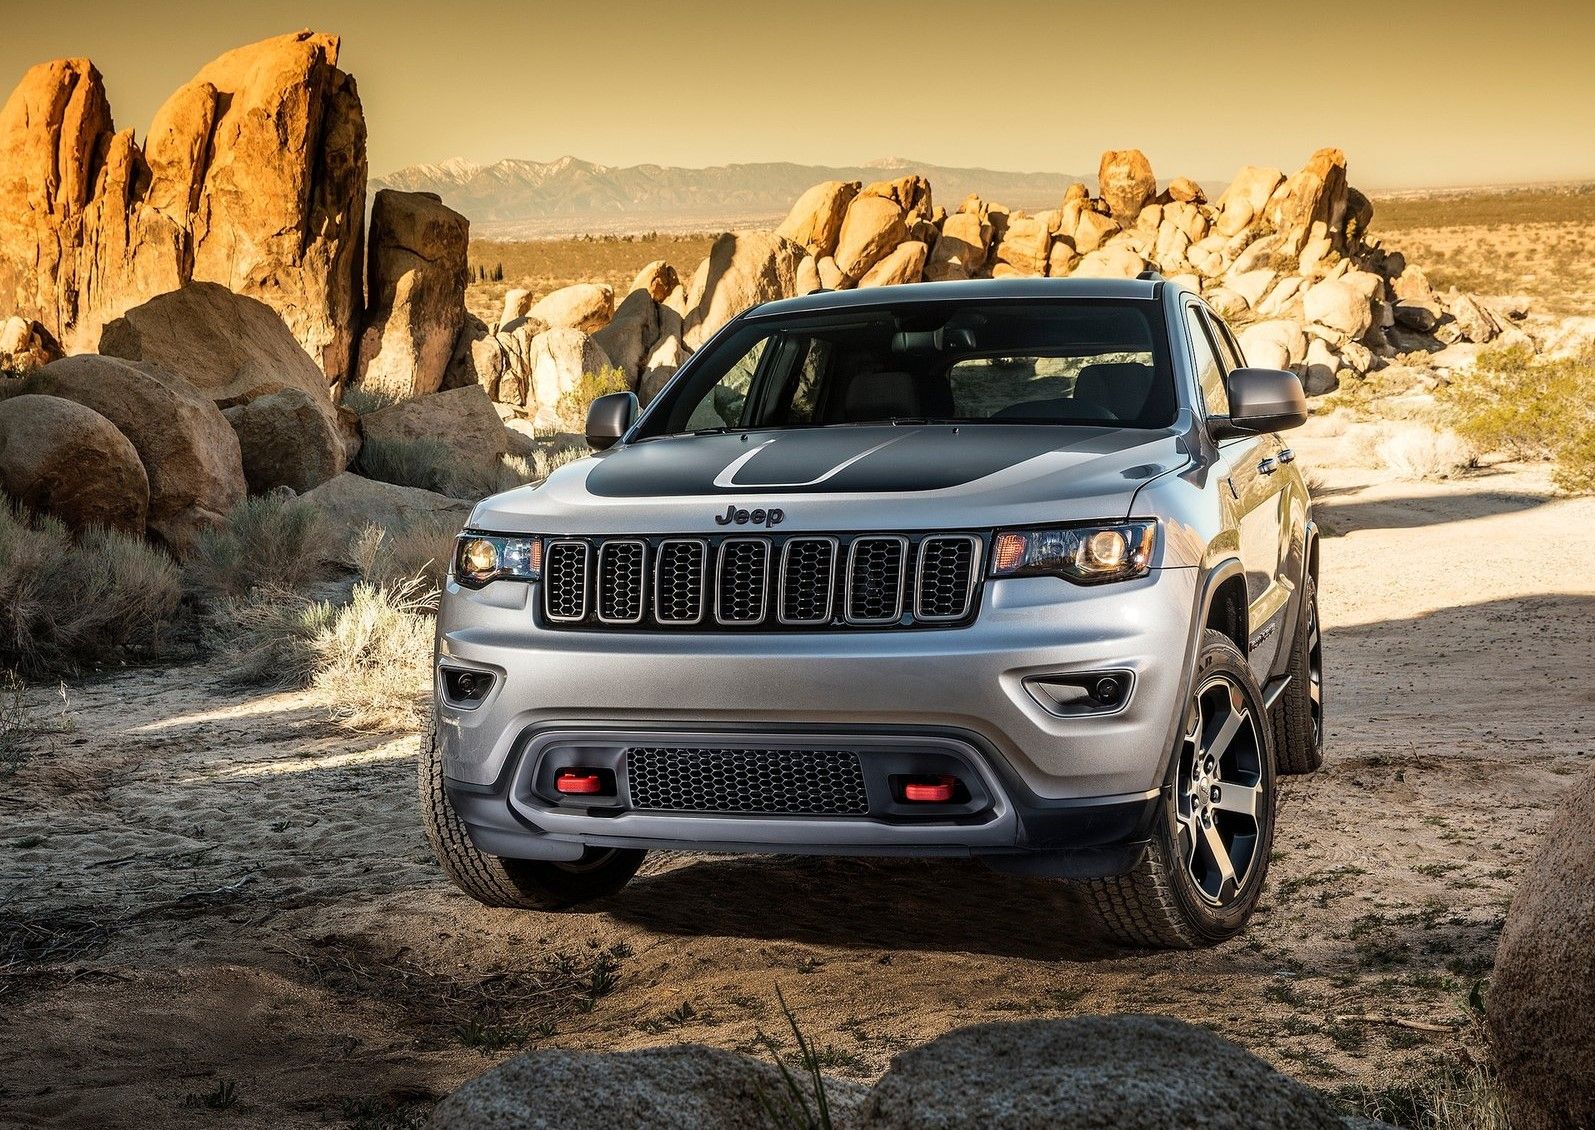 The Trailhawk trim of the 2017 Jeep Grand Cherokee.